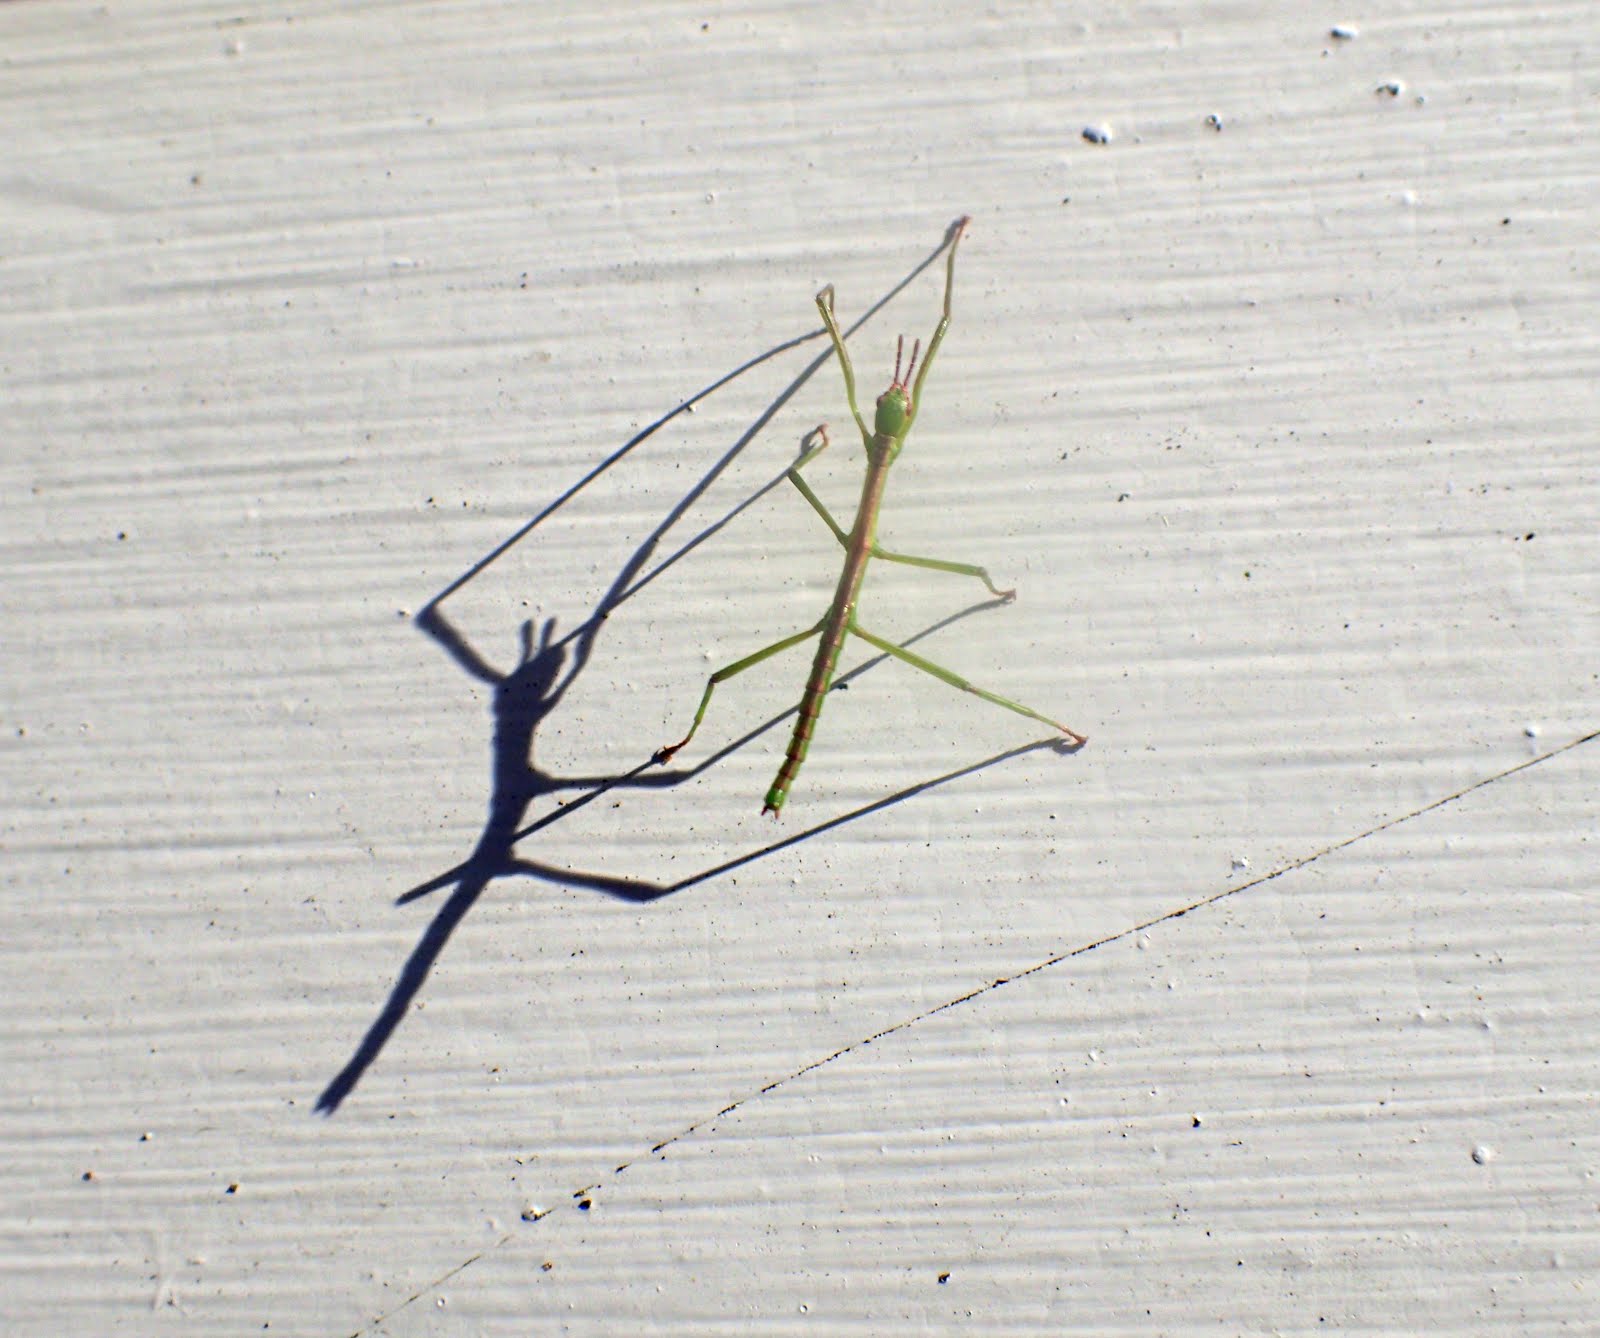 Baby stick insect heading up the house in the late afternoon